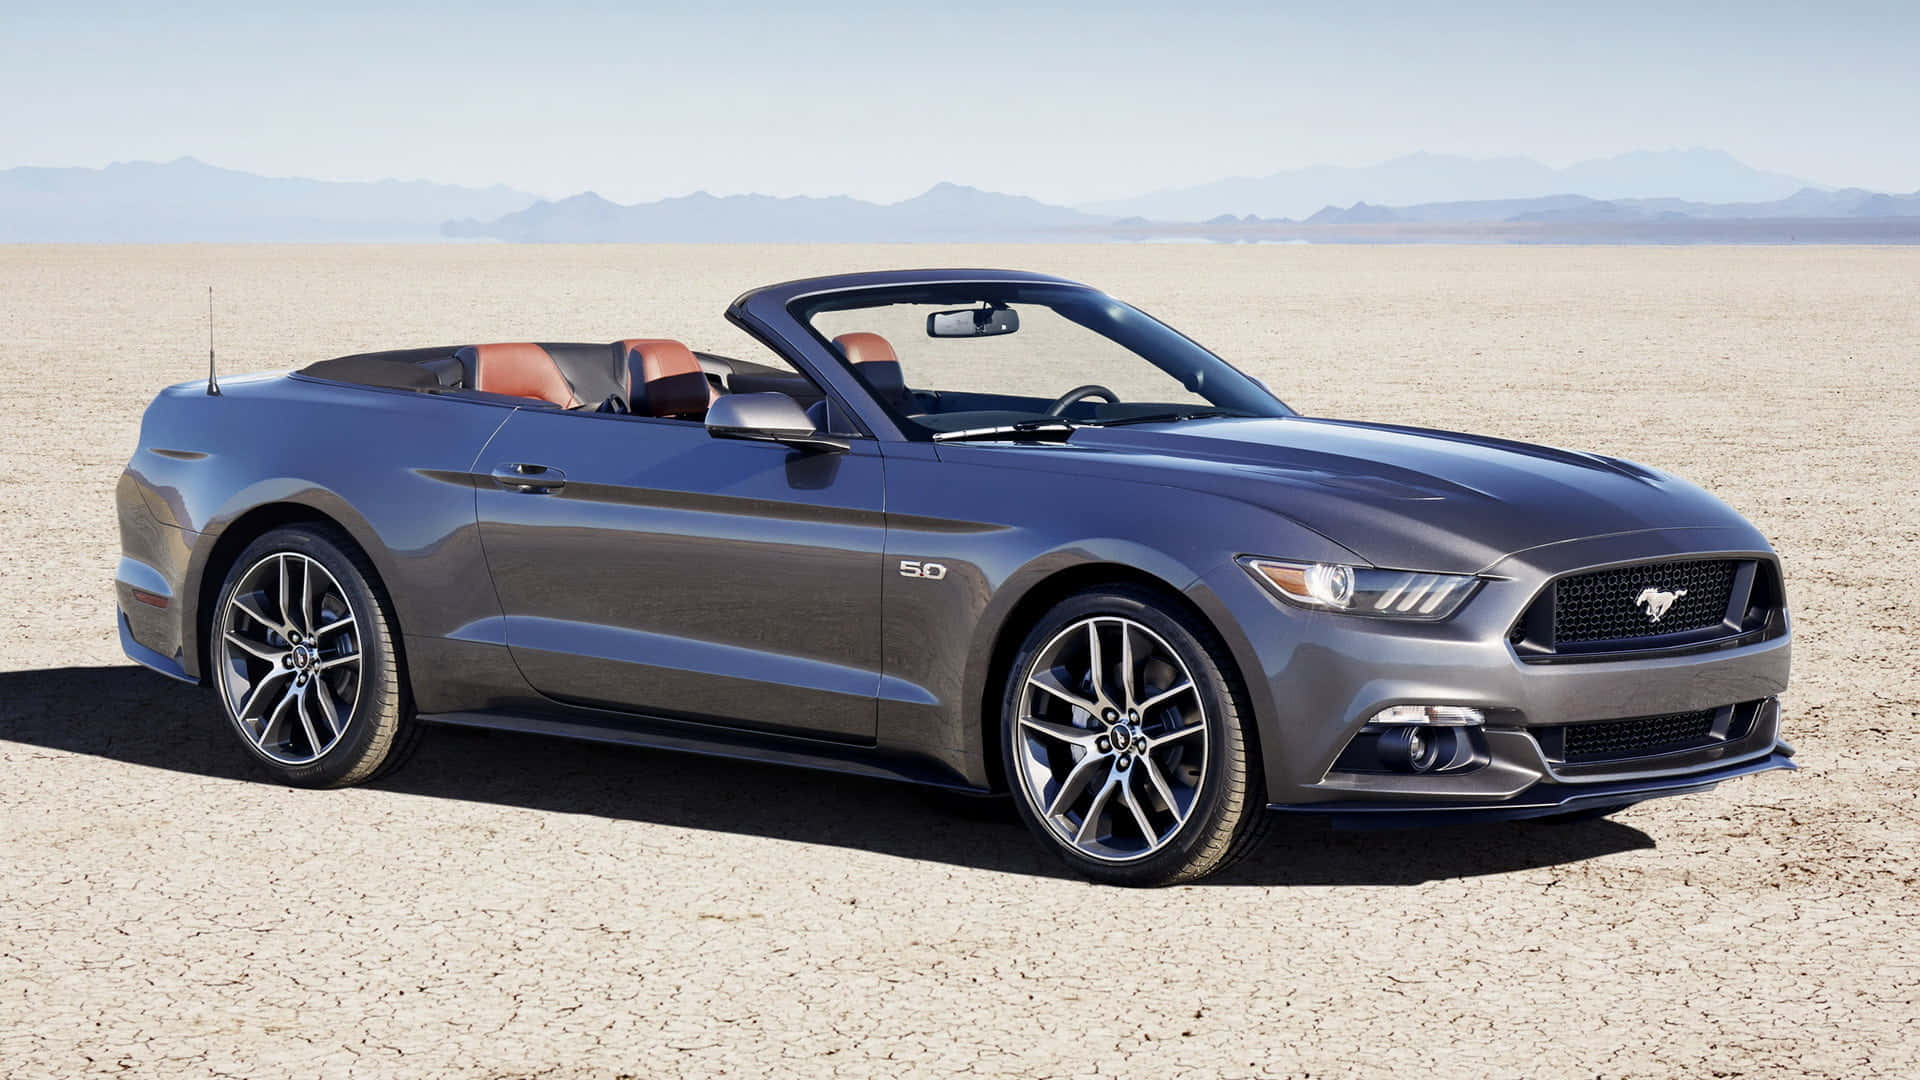 Stunning Ford Mustang Gt Convertible In A Breathtaking Sunset Wallpaper